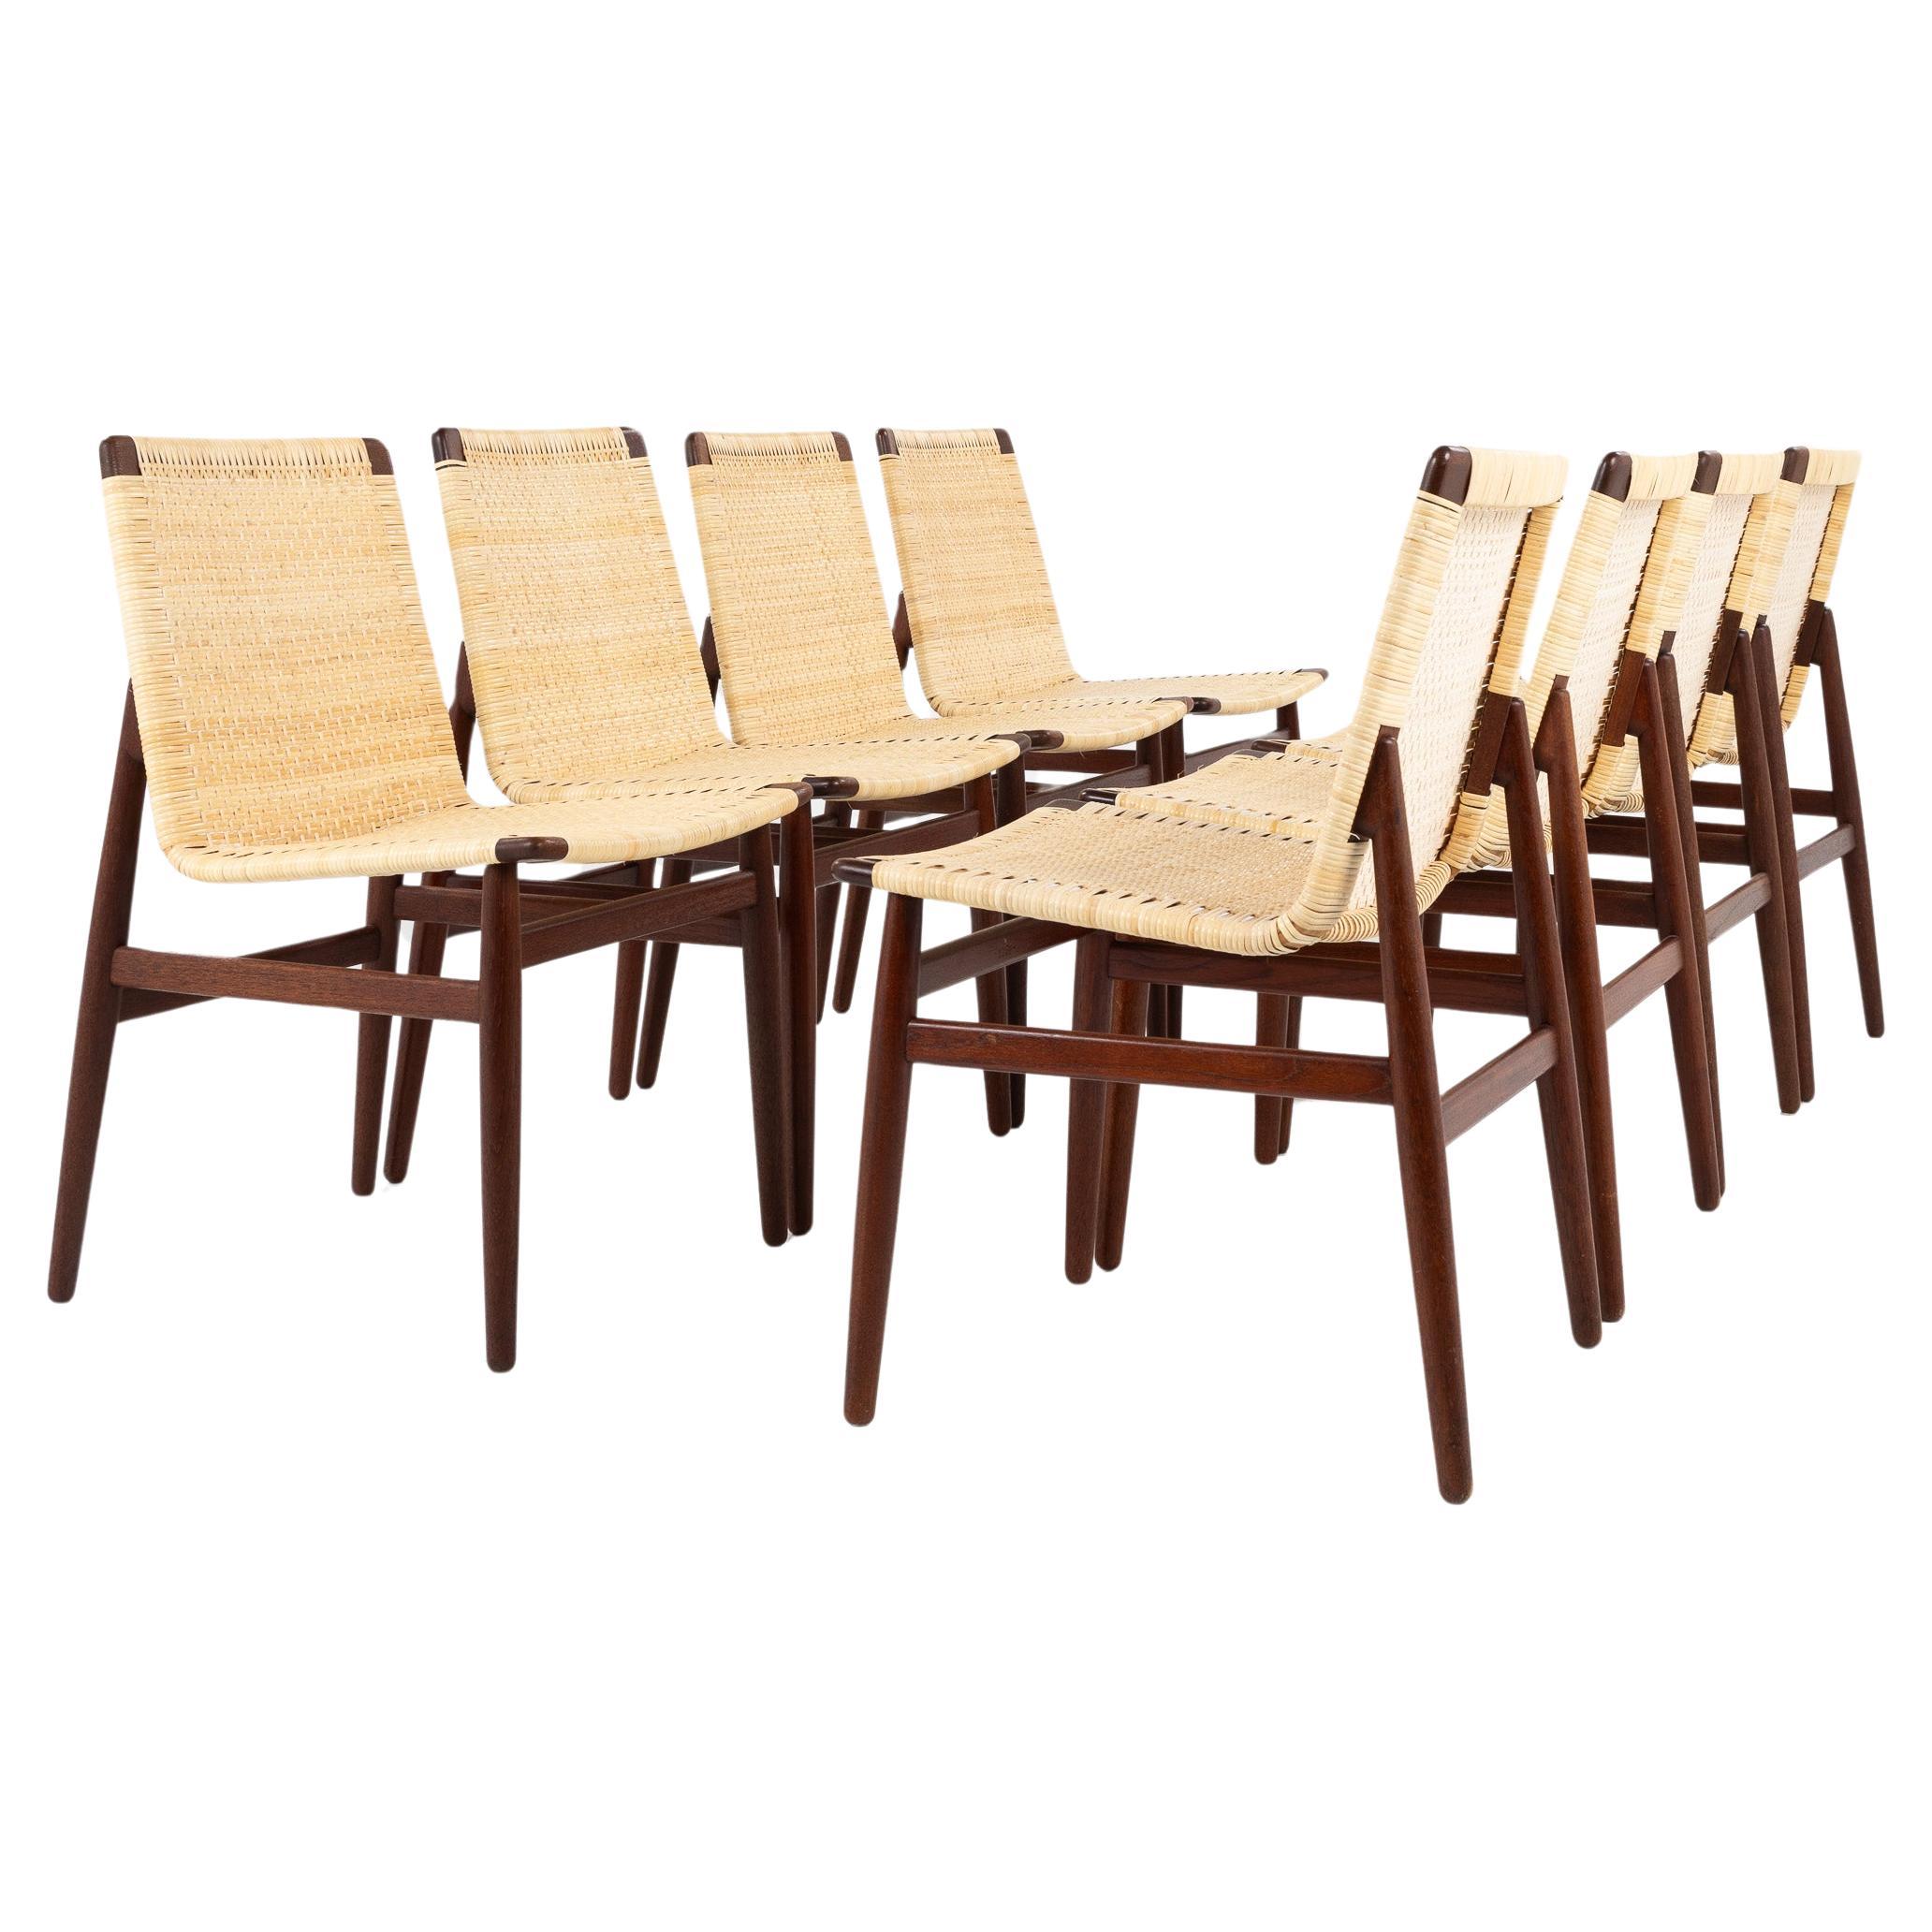 Thorald Madsen Snedkeri Dining Room Chairs